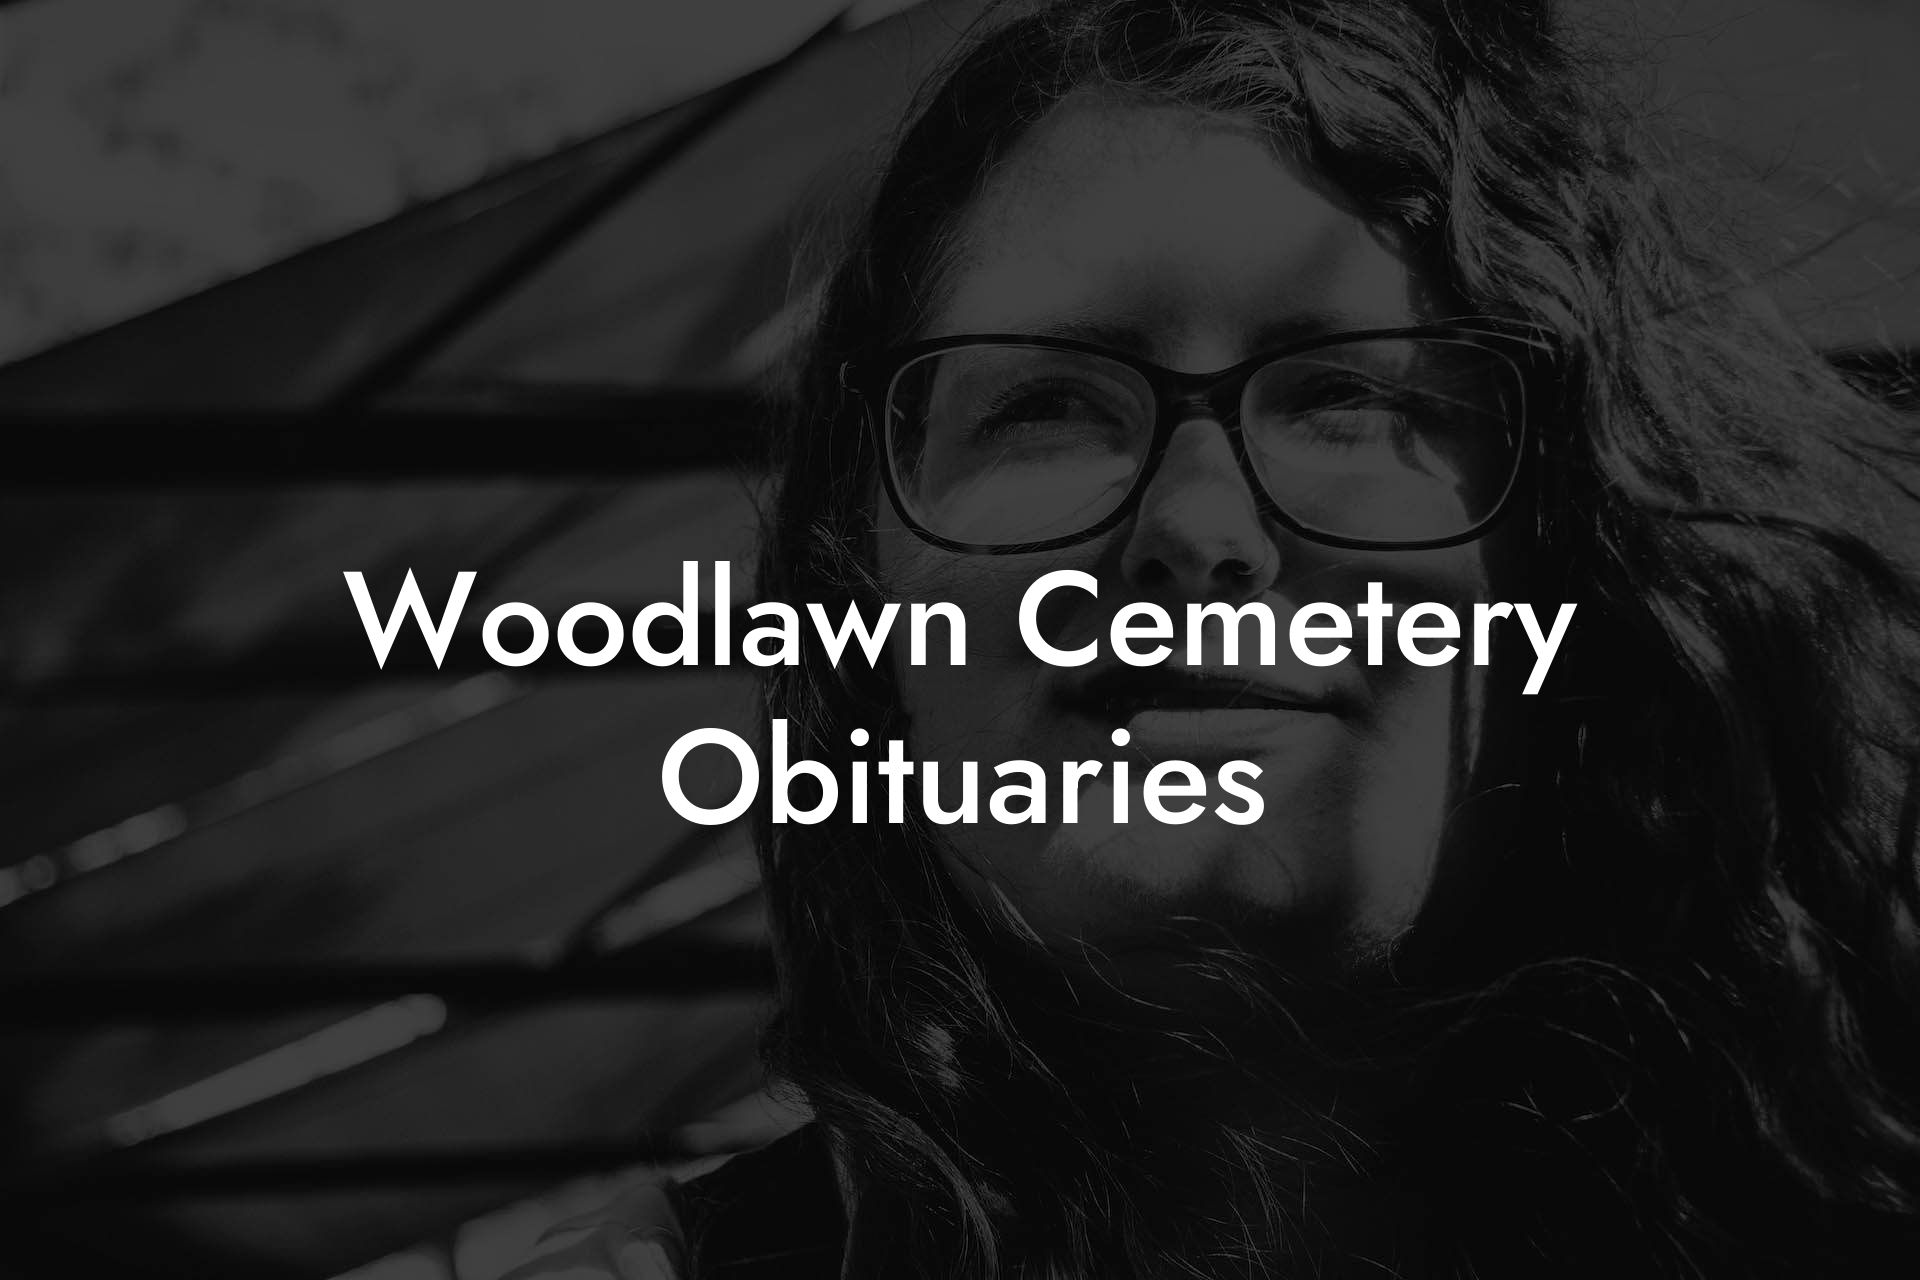 Woodlawn Cemetery Obituaries